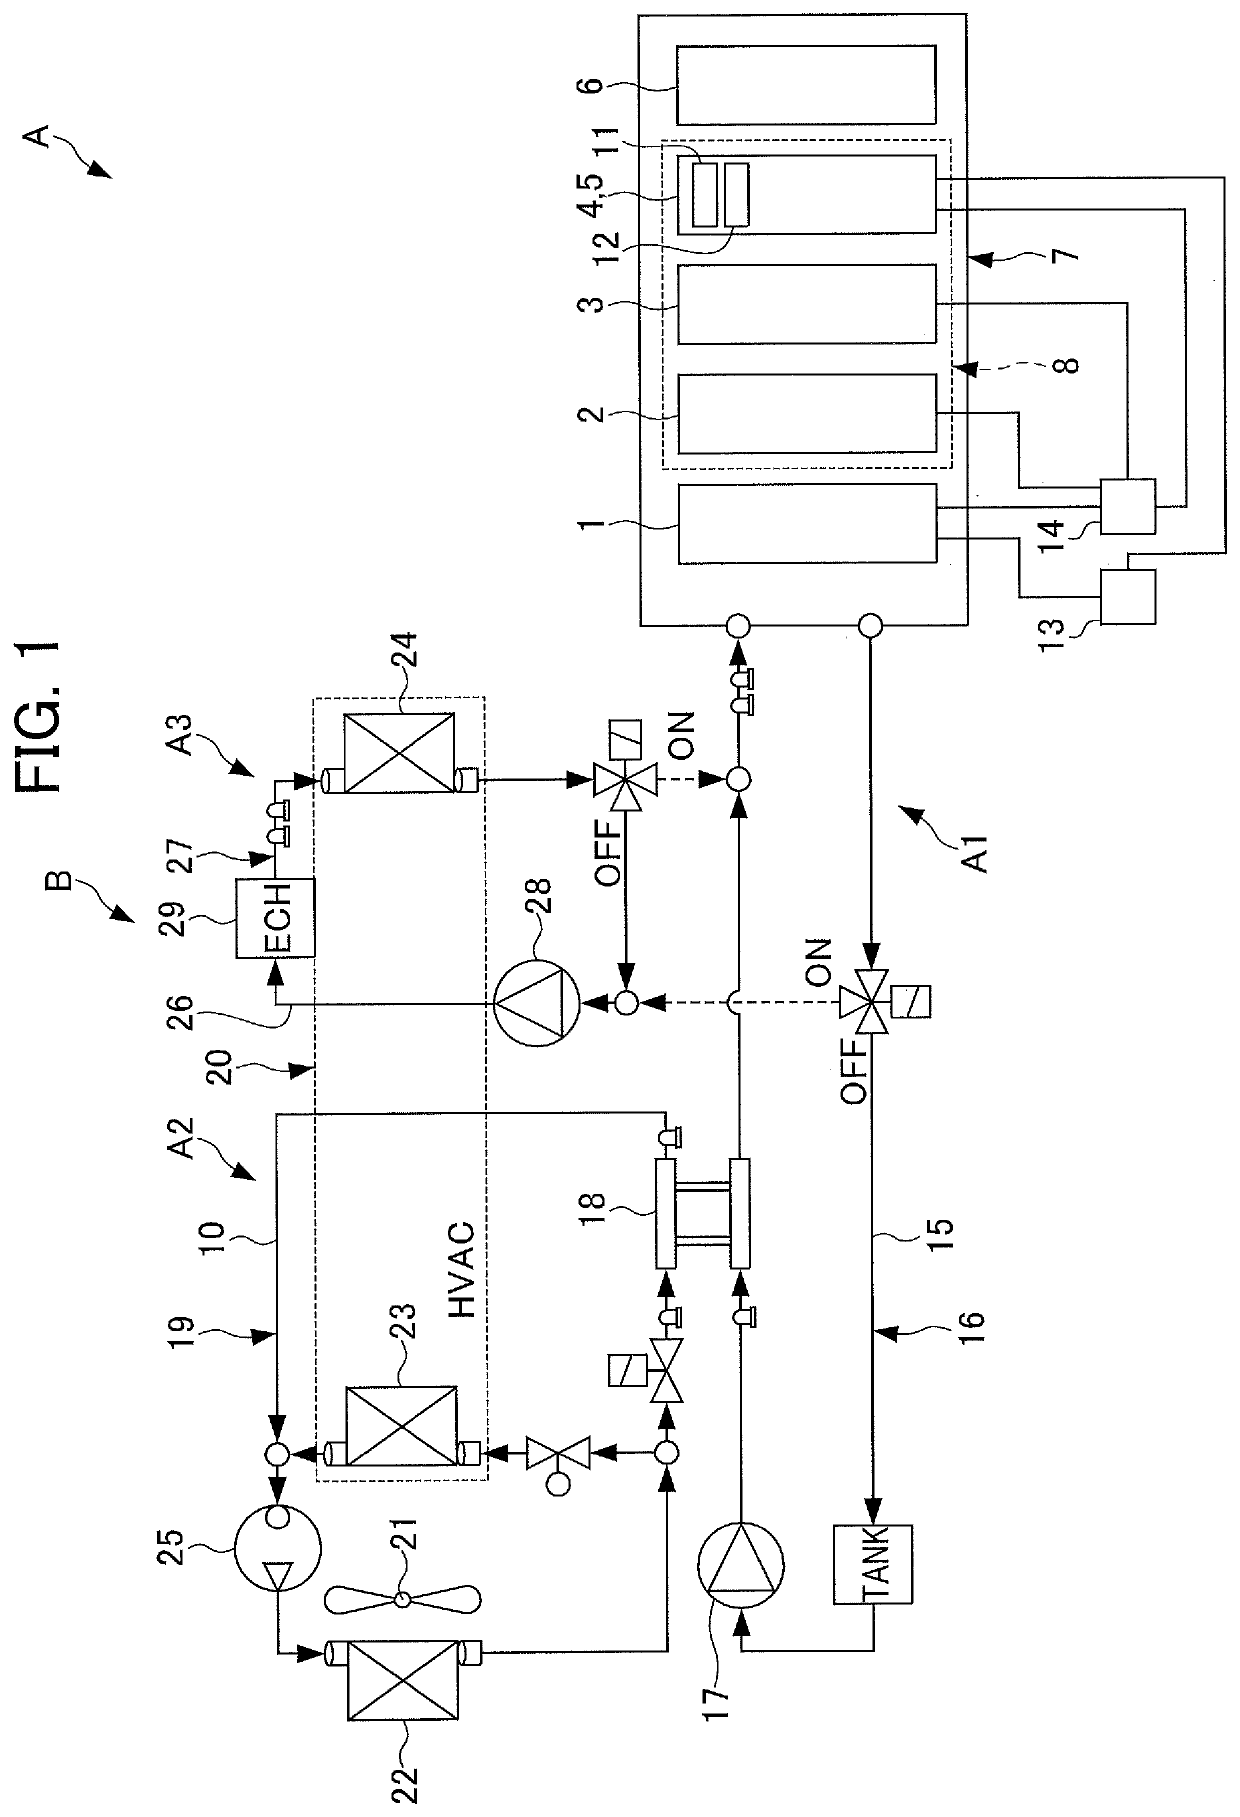 Battery cooling control system